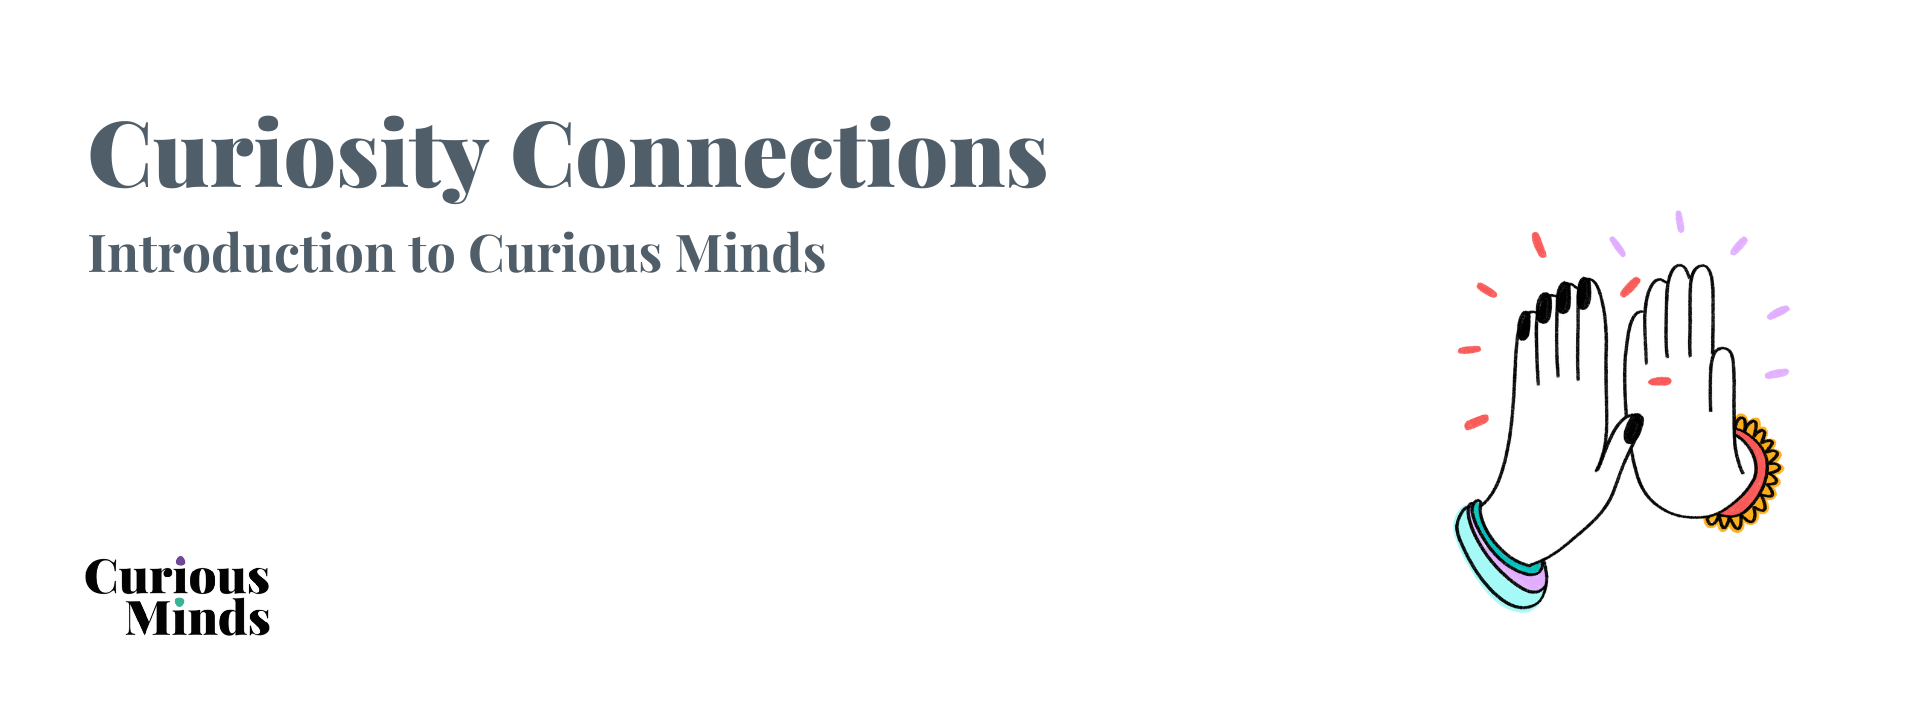 Web banner for Curiosity Connections - Introduction to Curious Minds